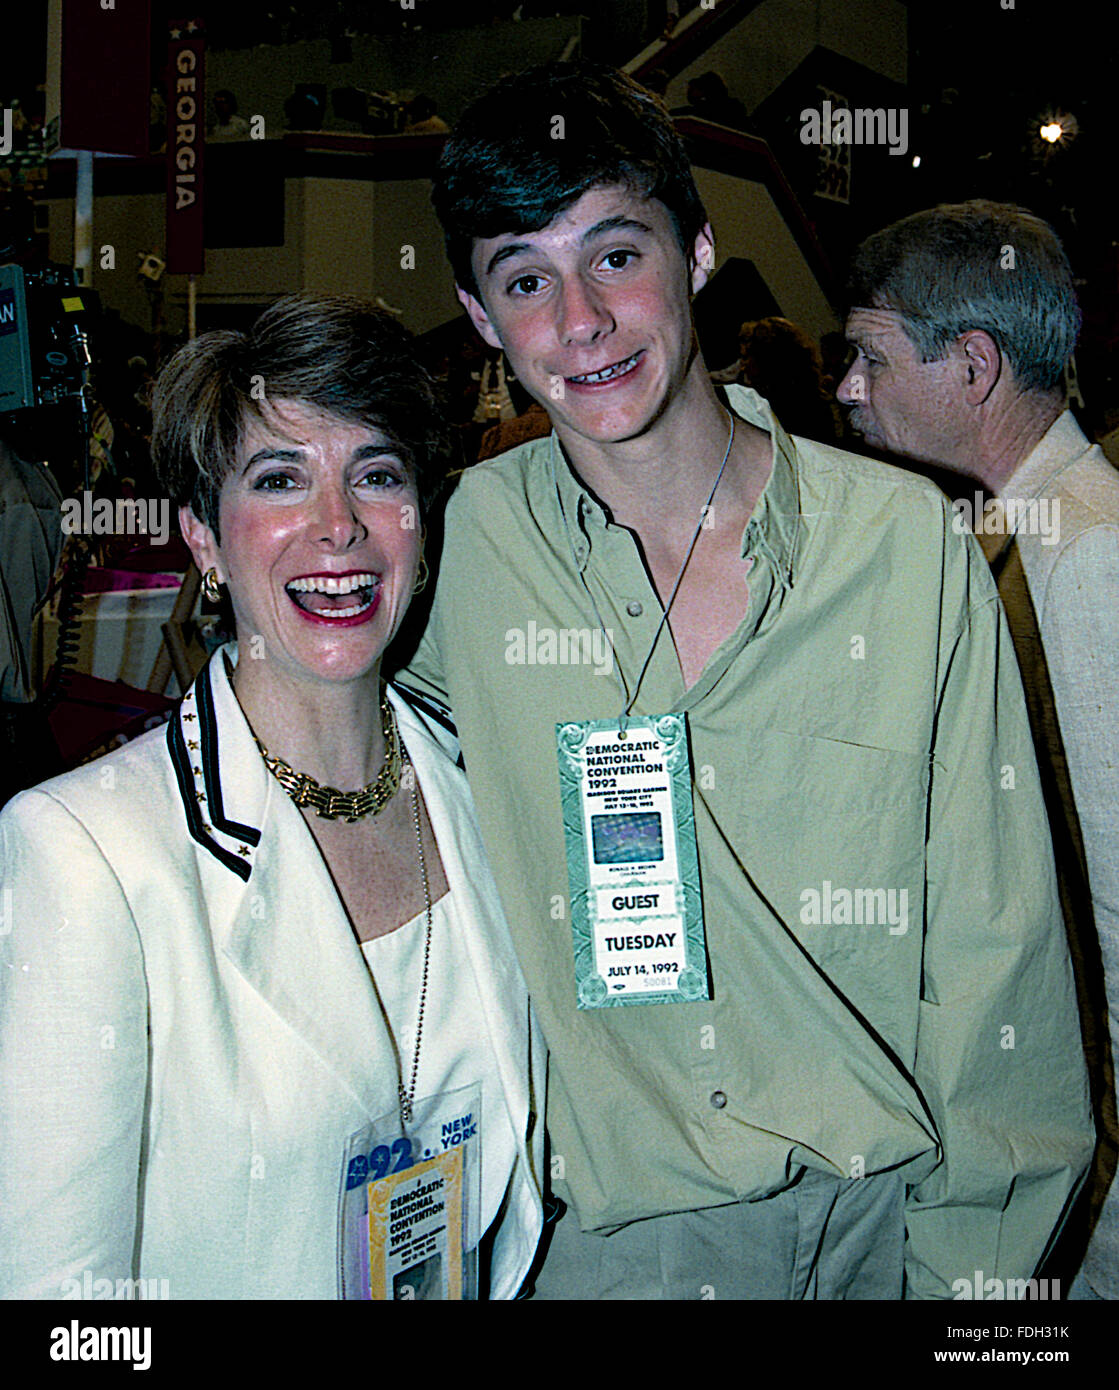 New York, NY., USA, 14th July, 1992 Congresswoman Marjorie Margolies-Mezvinsky (D-PA) and her son Marc Mezvinsky (15 years old)  pose together while walking the floor of the Democratic National Convention in Madison Square Garden. Marjorie Margolies,  is a former journalist and a Democratic politician. From 1993 to 1995, she was a member of the U.S. House of Representatives, representing Pennsylvania. Her son, Marc Mezvinsky, married Chelsea Clinton, the daughter of former U.S. President Bill Clinton and former U.S. Secretary of State Hillary Rodham Clinton. Credit: Mark Reinstein Stock Photo